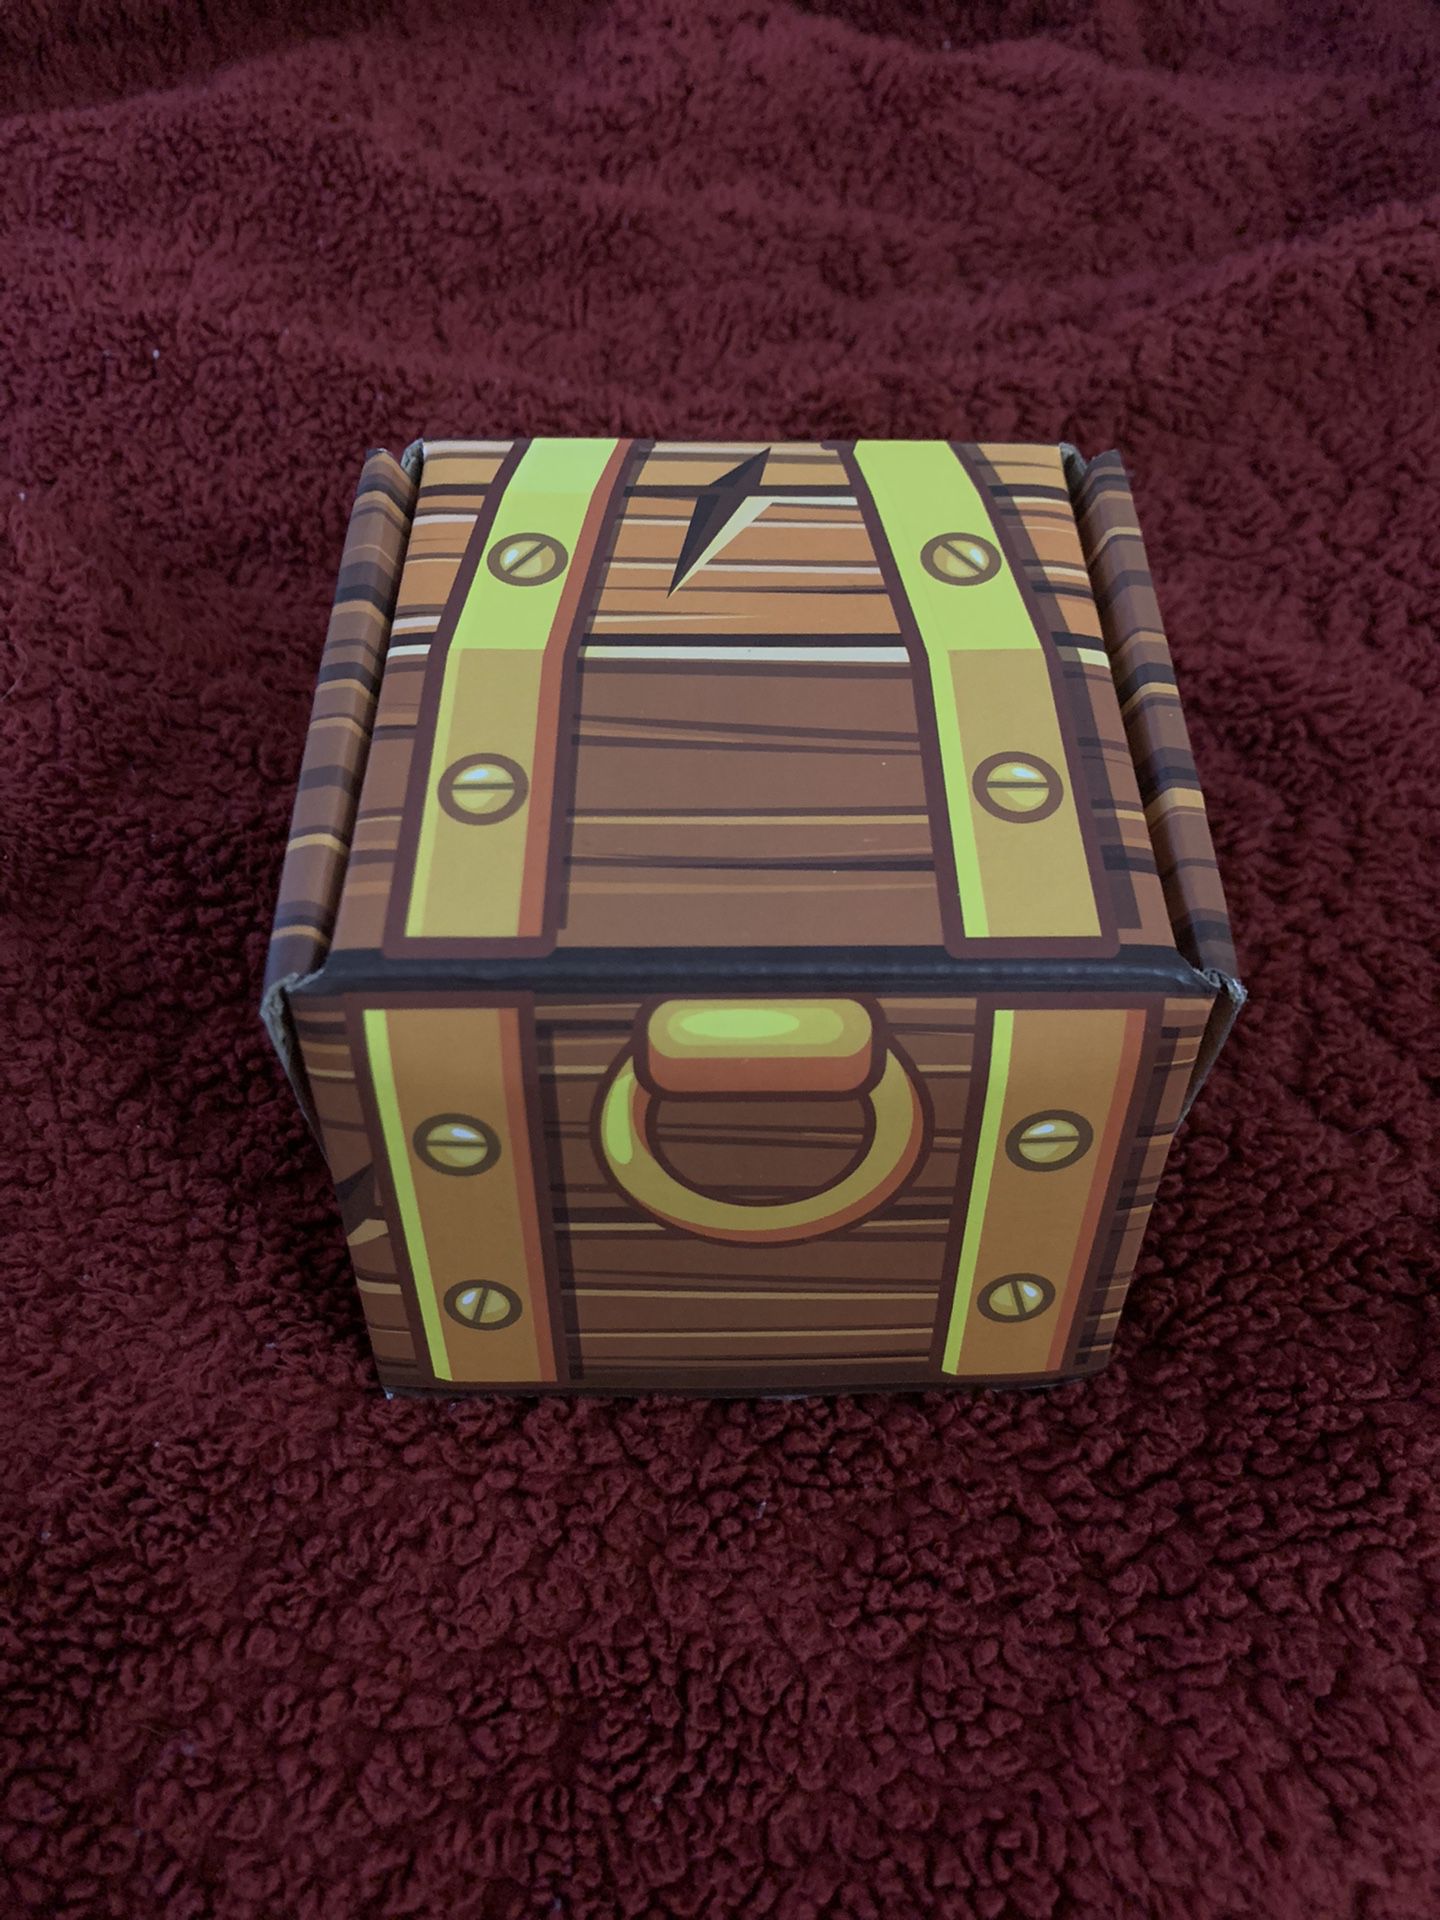 Suede’s mystery Pokemon Chest